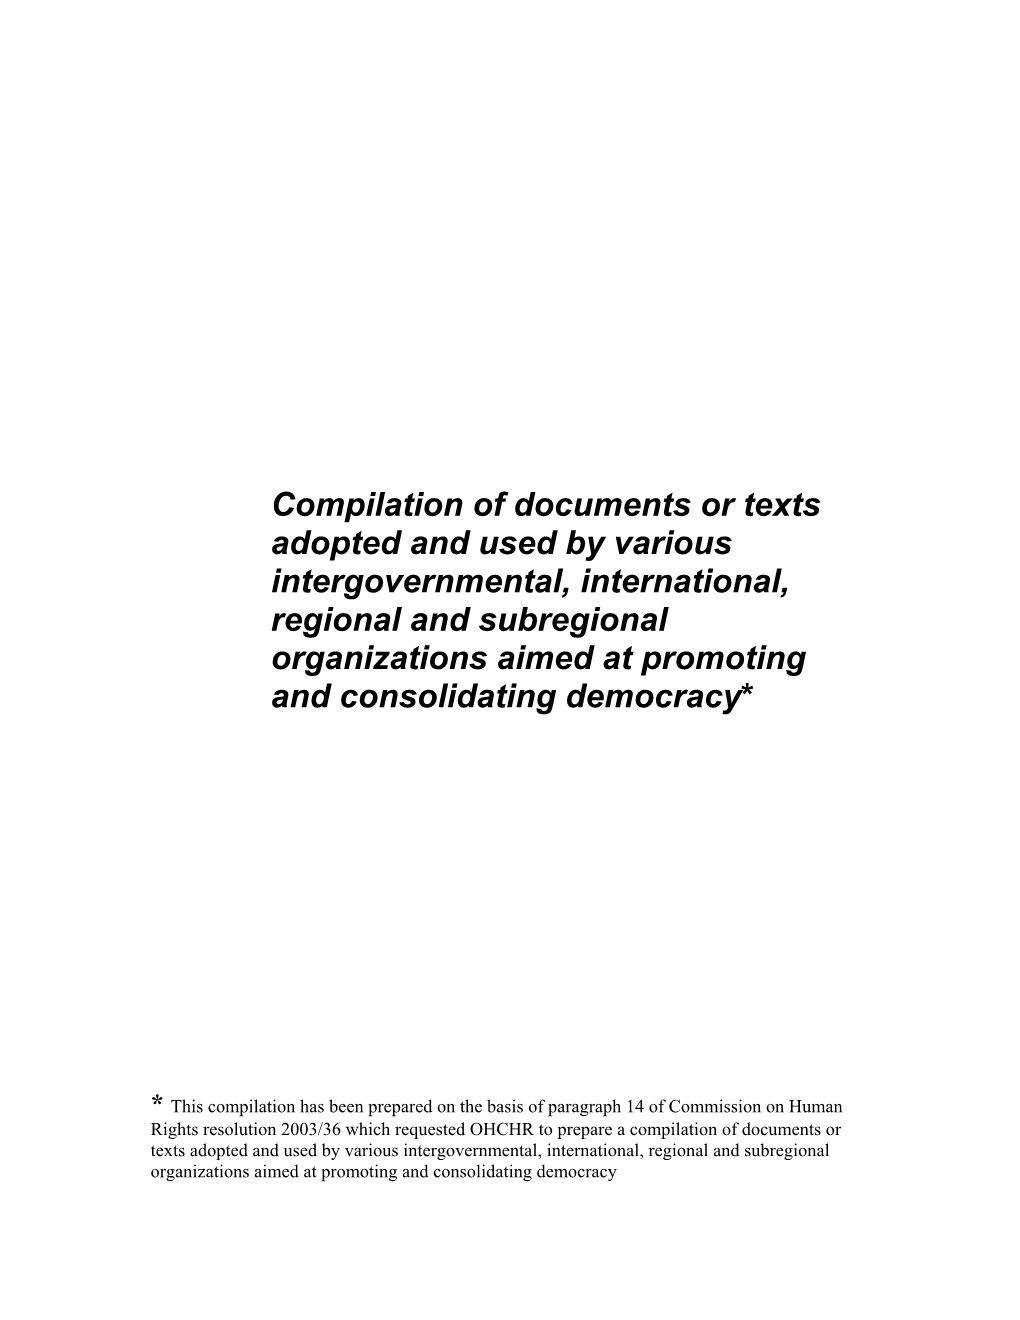 Compilation of Documents Or Texts Adopted and Used by Various Intergovernmental, International, Regional and Subregional Organiz